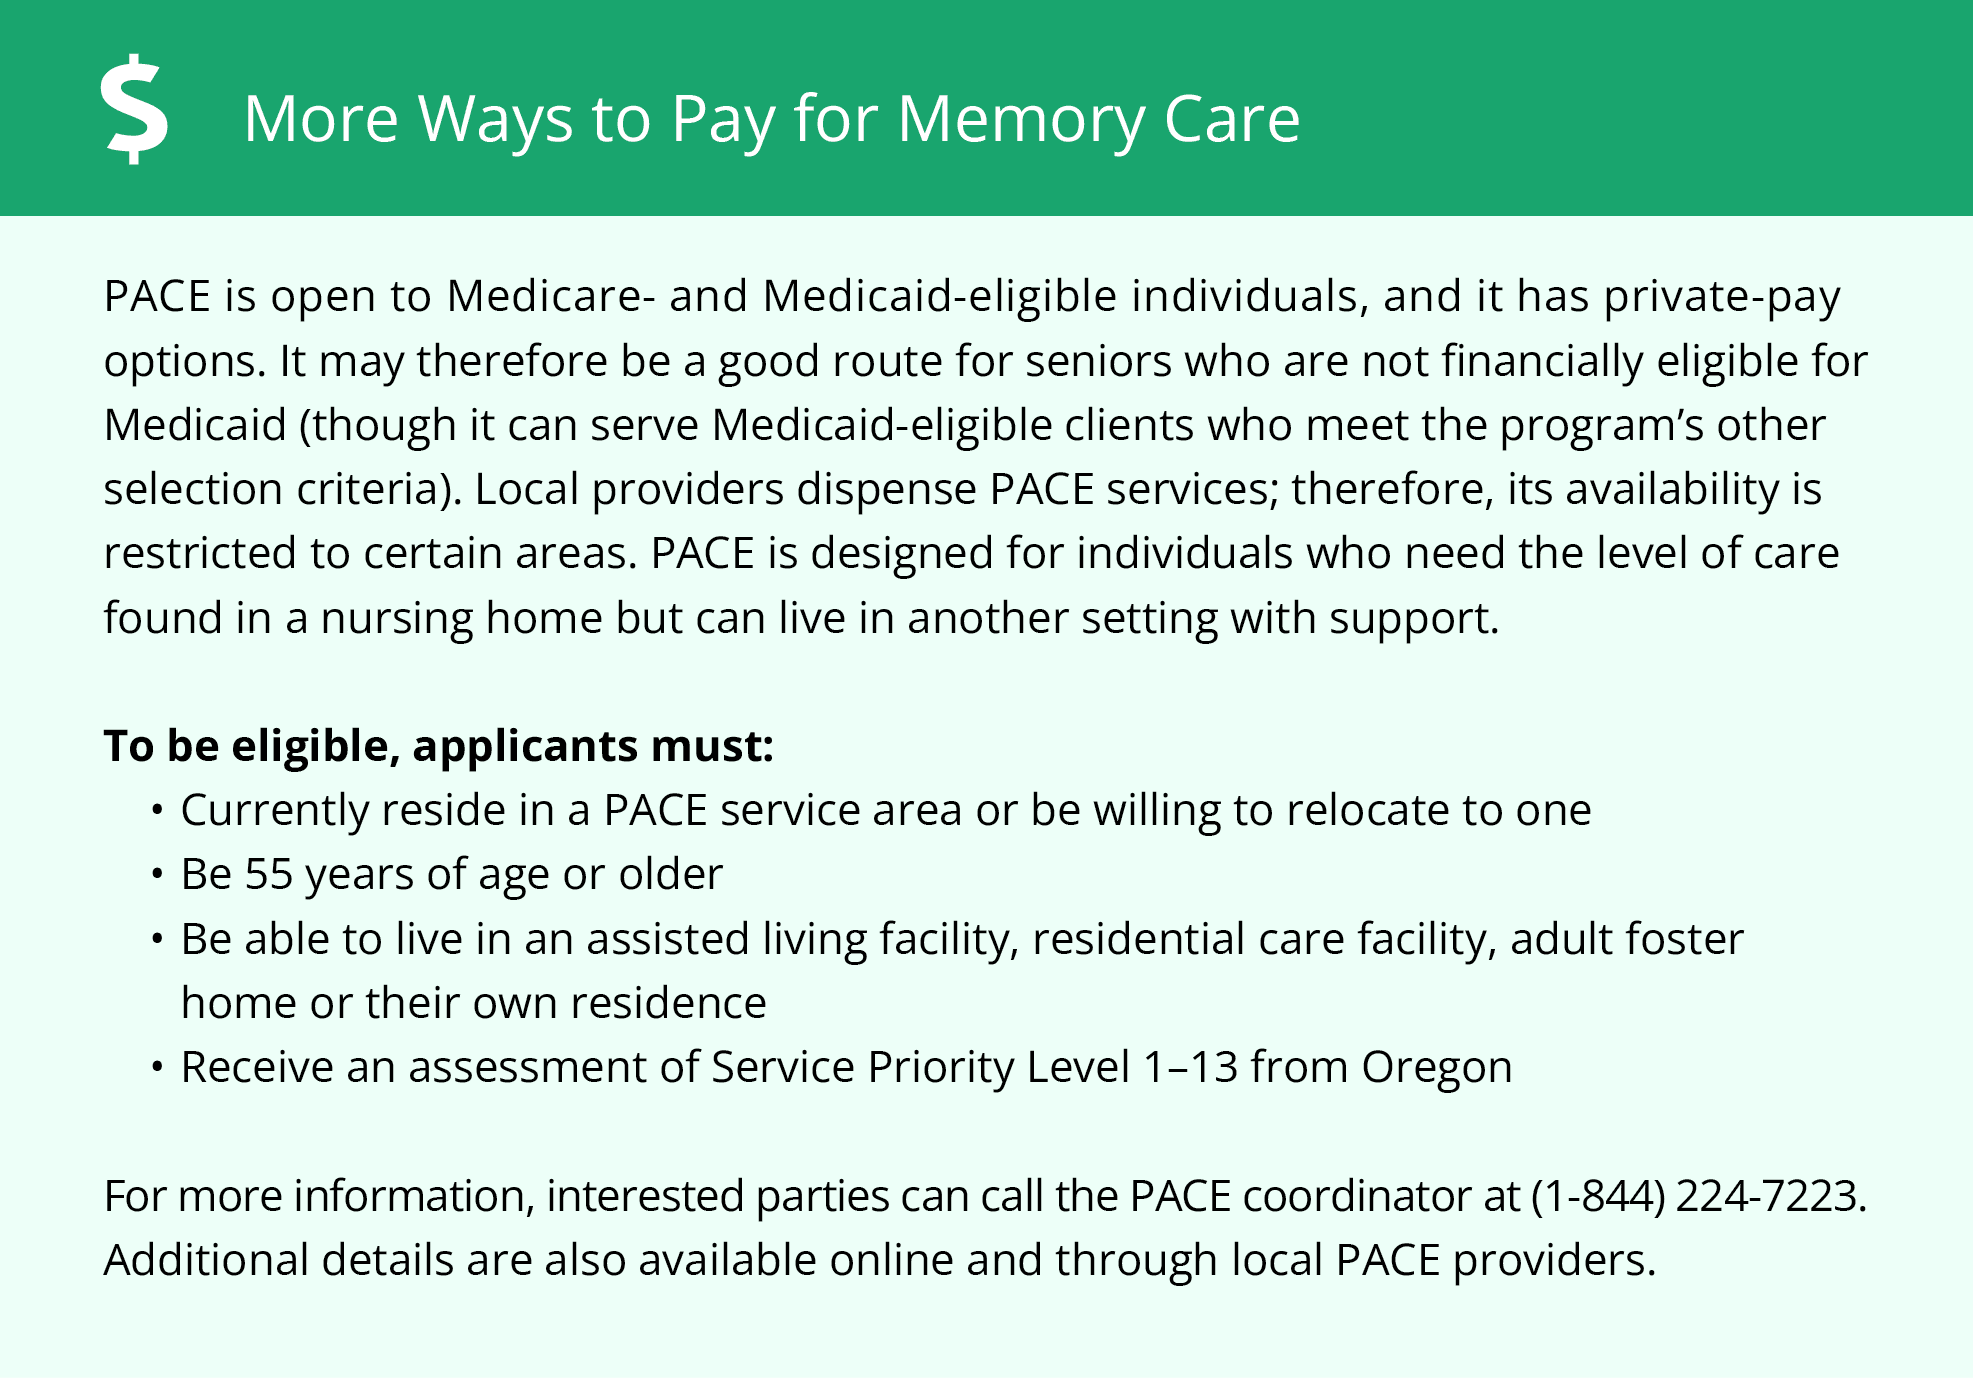 More ways to pay for memory care in OR